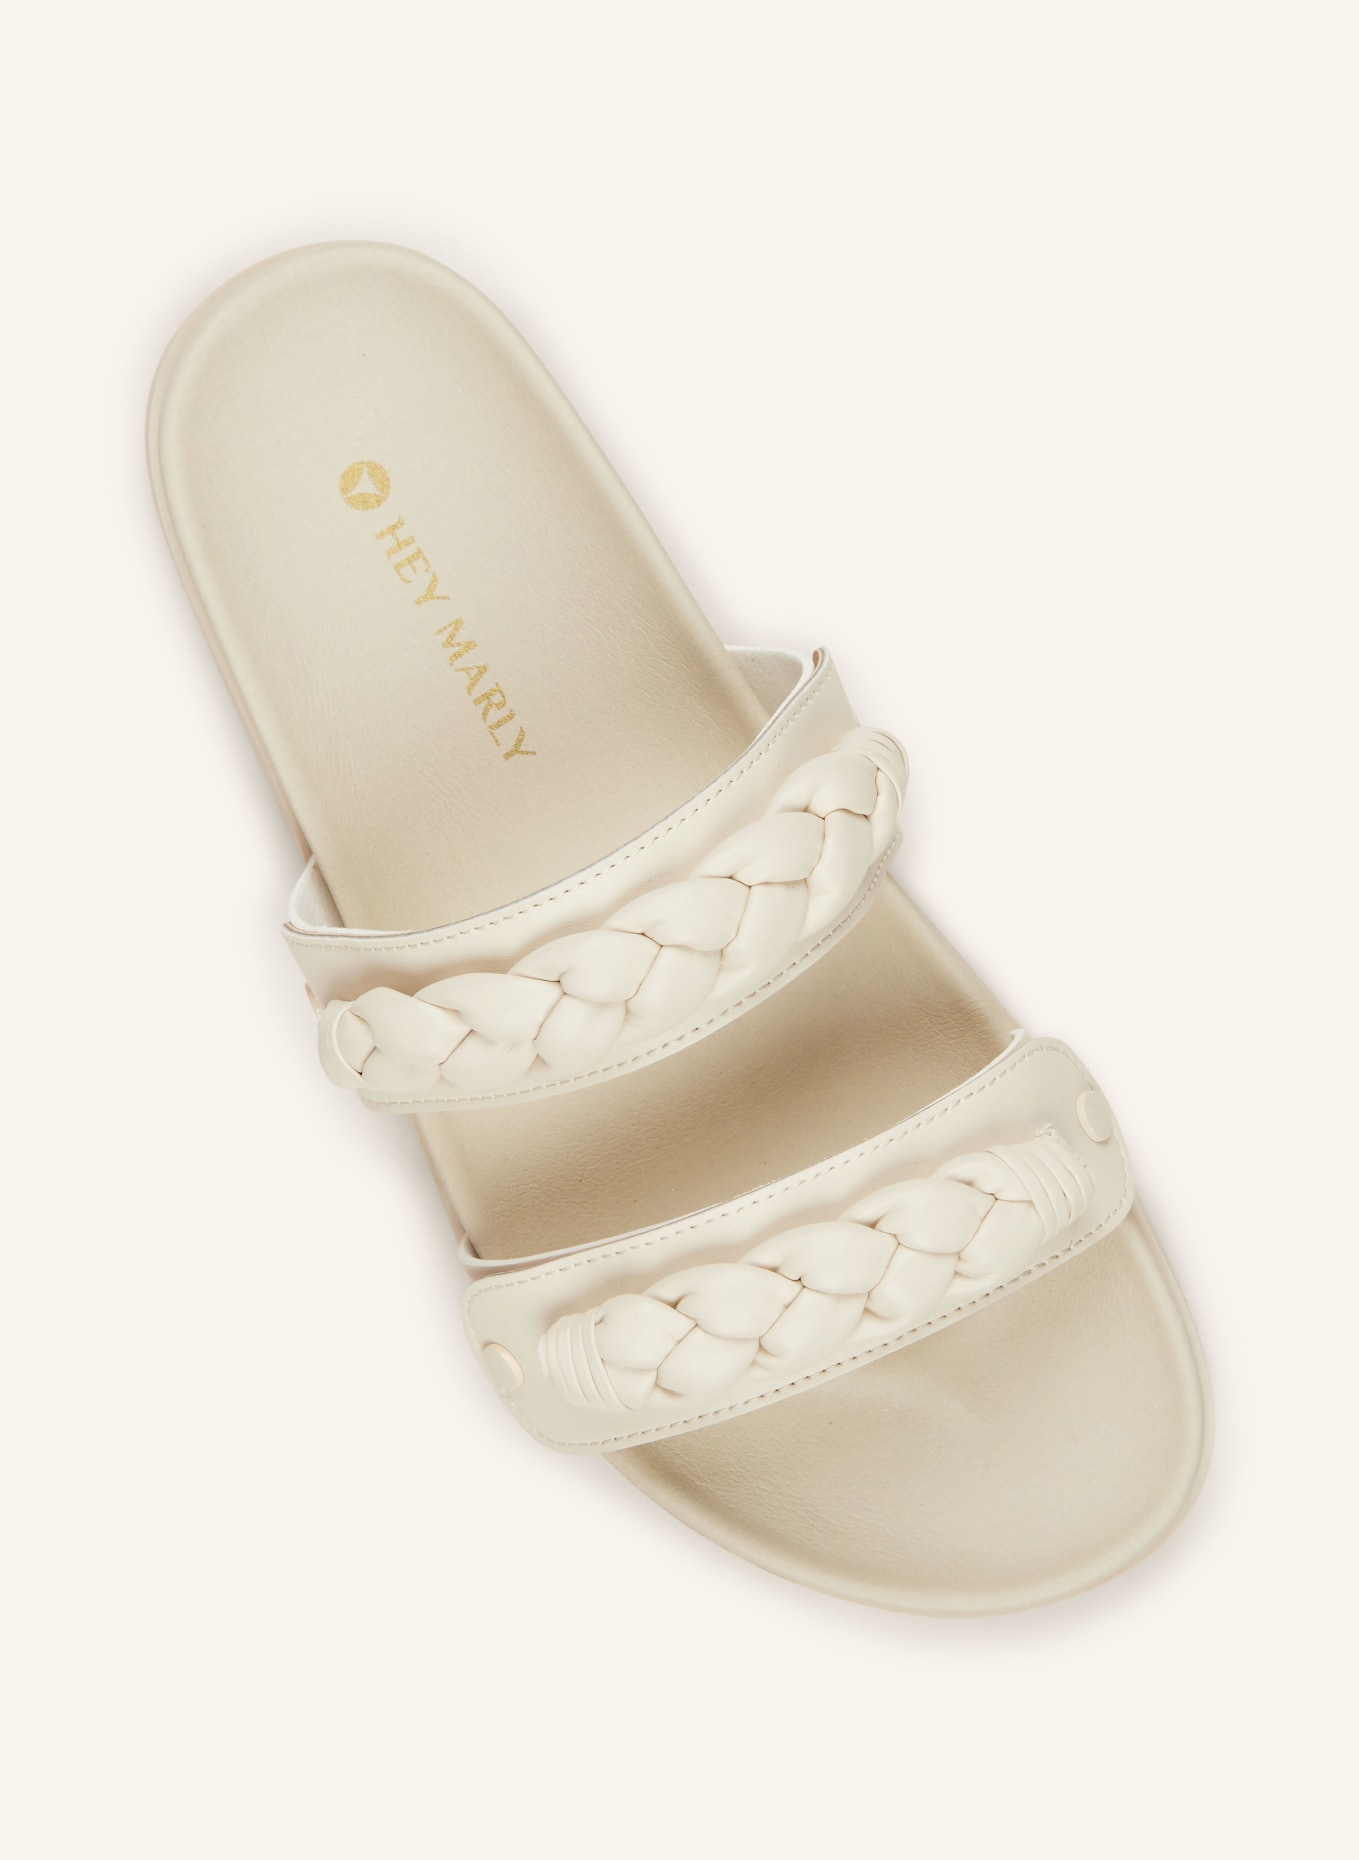 HEY MARLY Sandalen-Topping BRAIDED, Farbe: CREME (Bild 2)